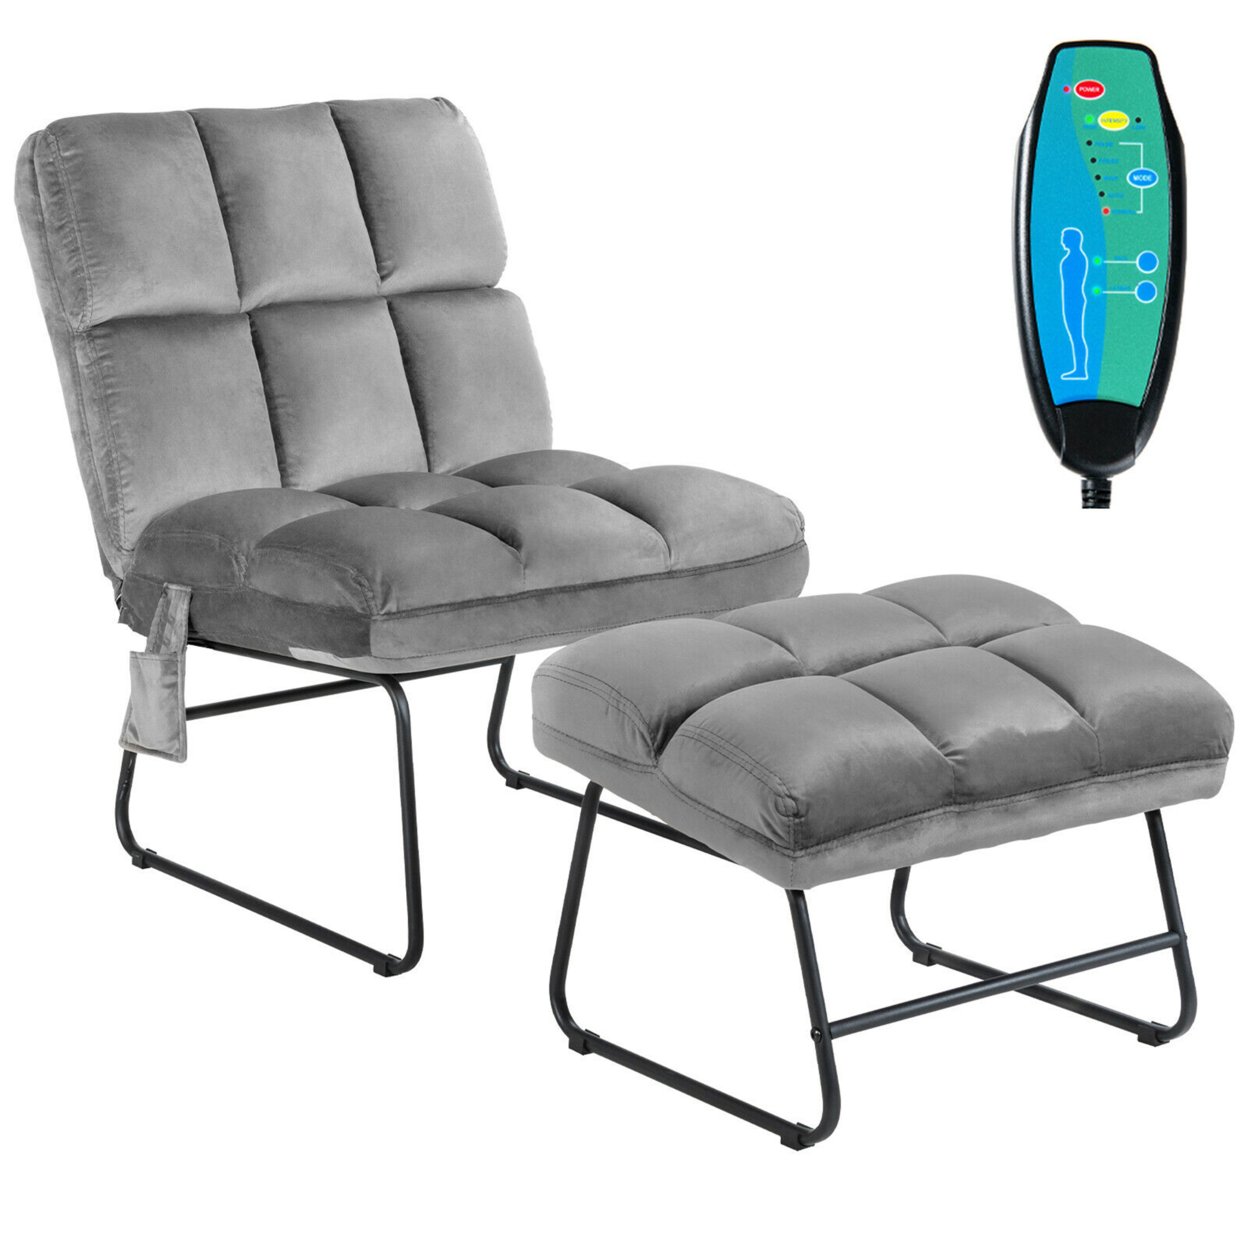 Electric Massage Chair Vibrating Velvet Sofa W/Ottoman And Remote Control Gray